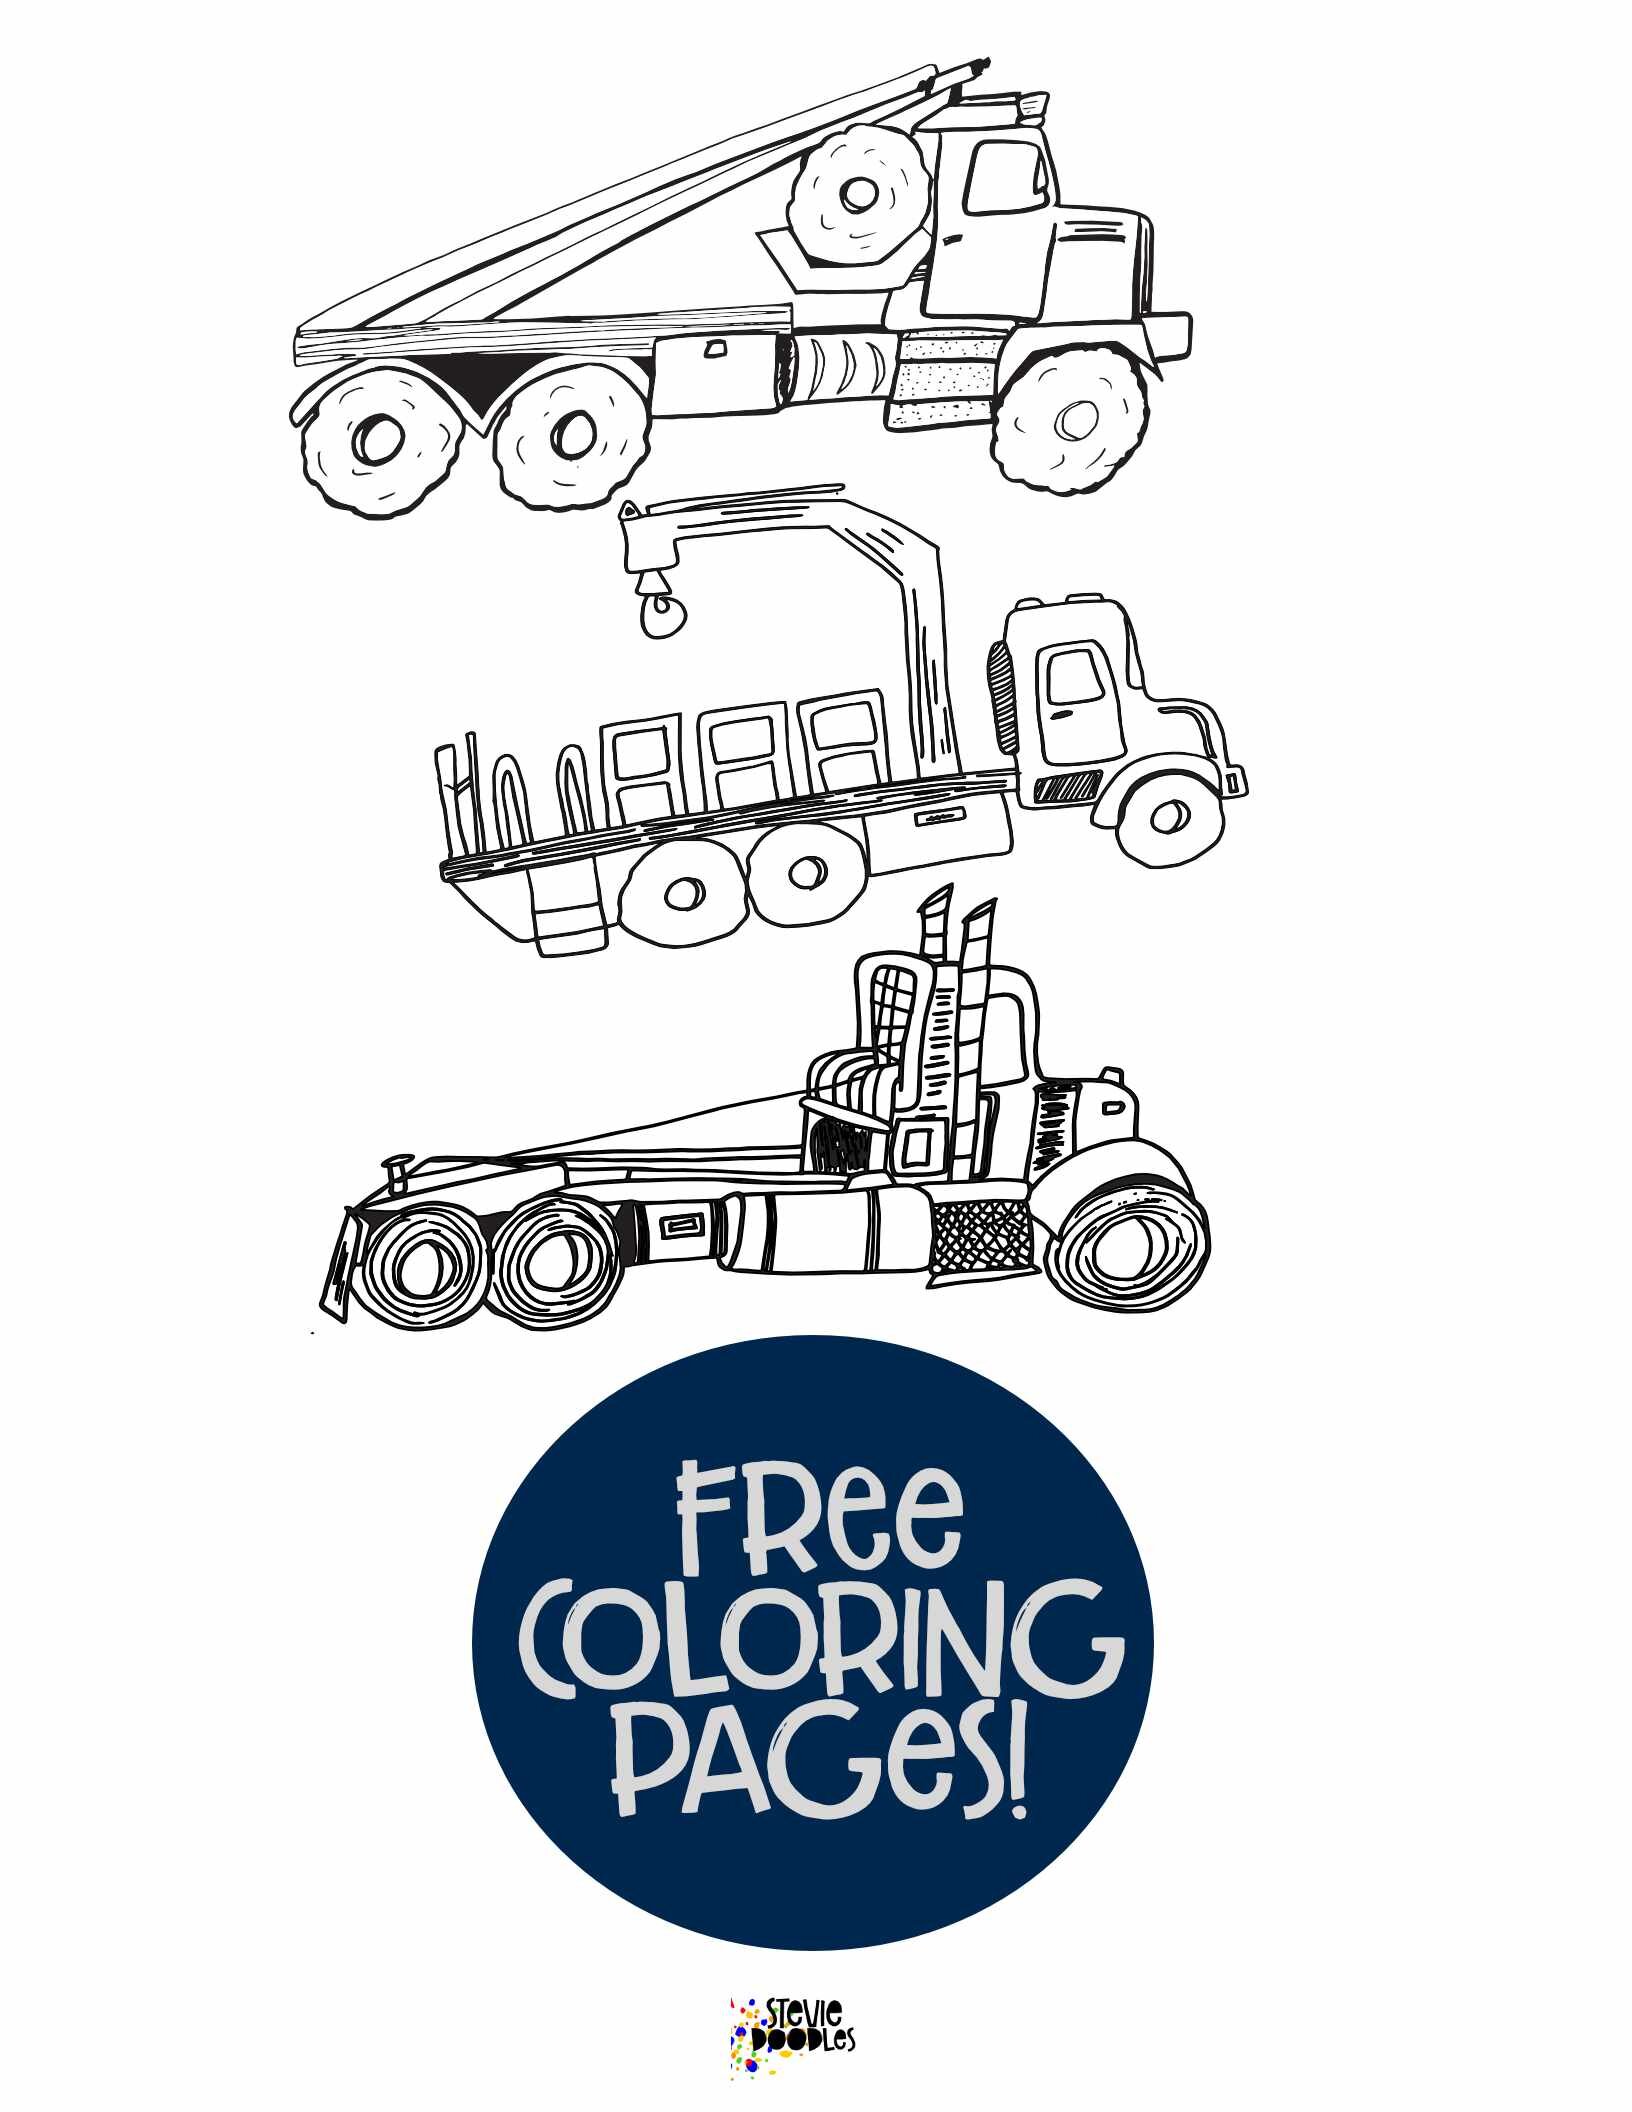 3 Trucks free printable coloring page Over 1000 free coloring pages at Stevie Doodles